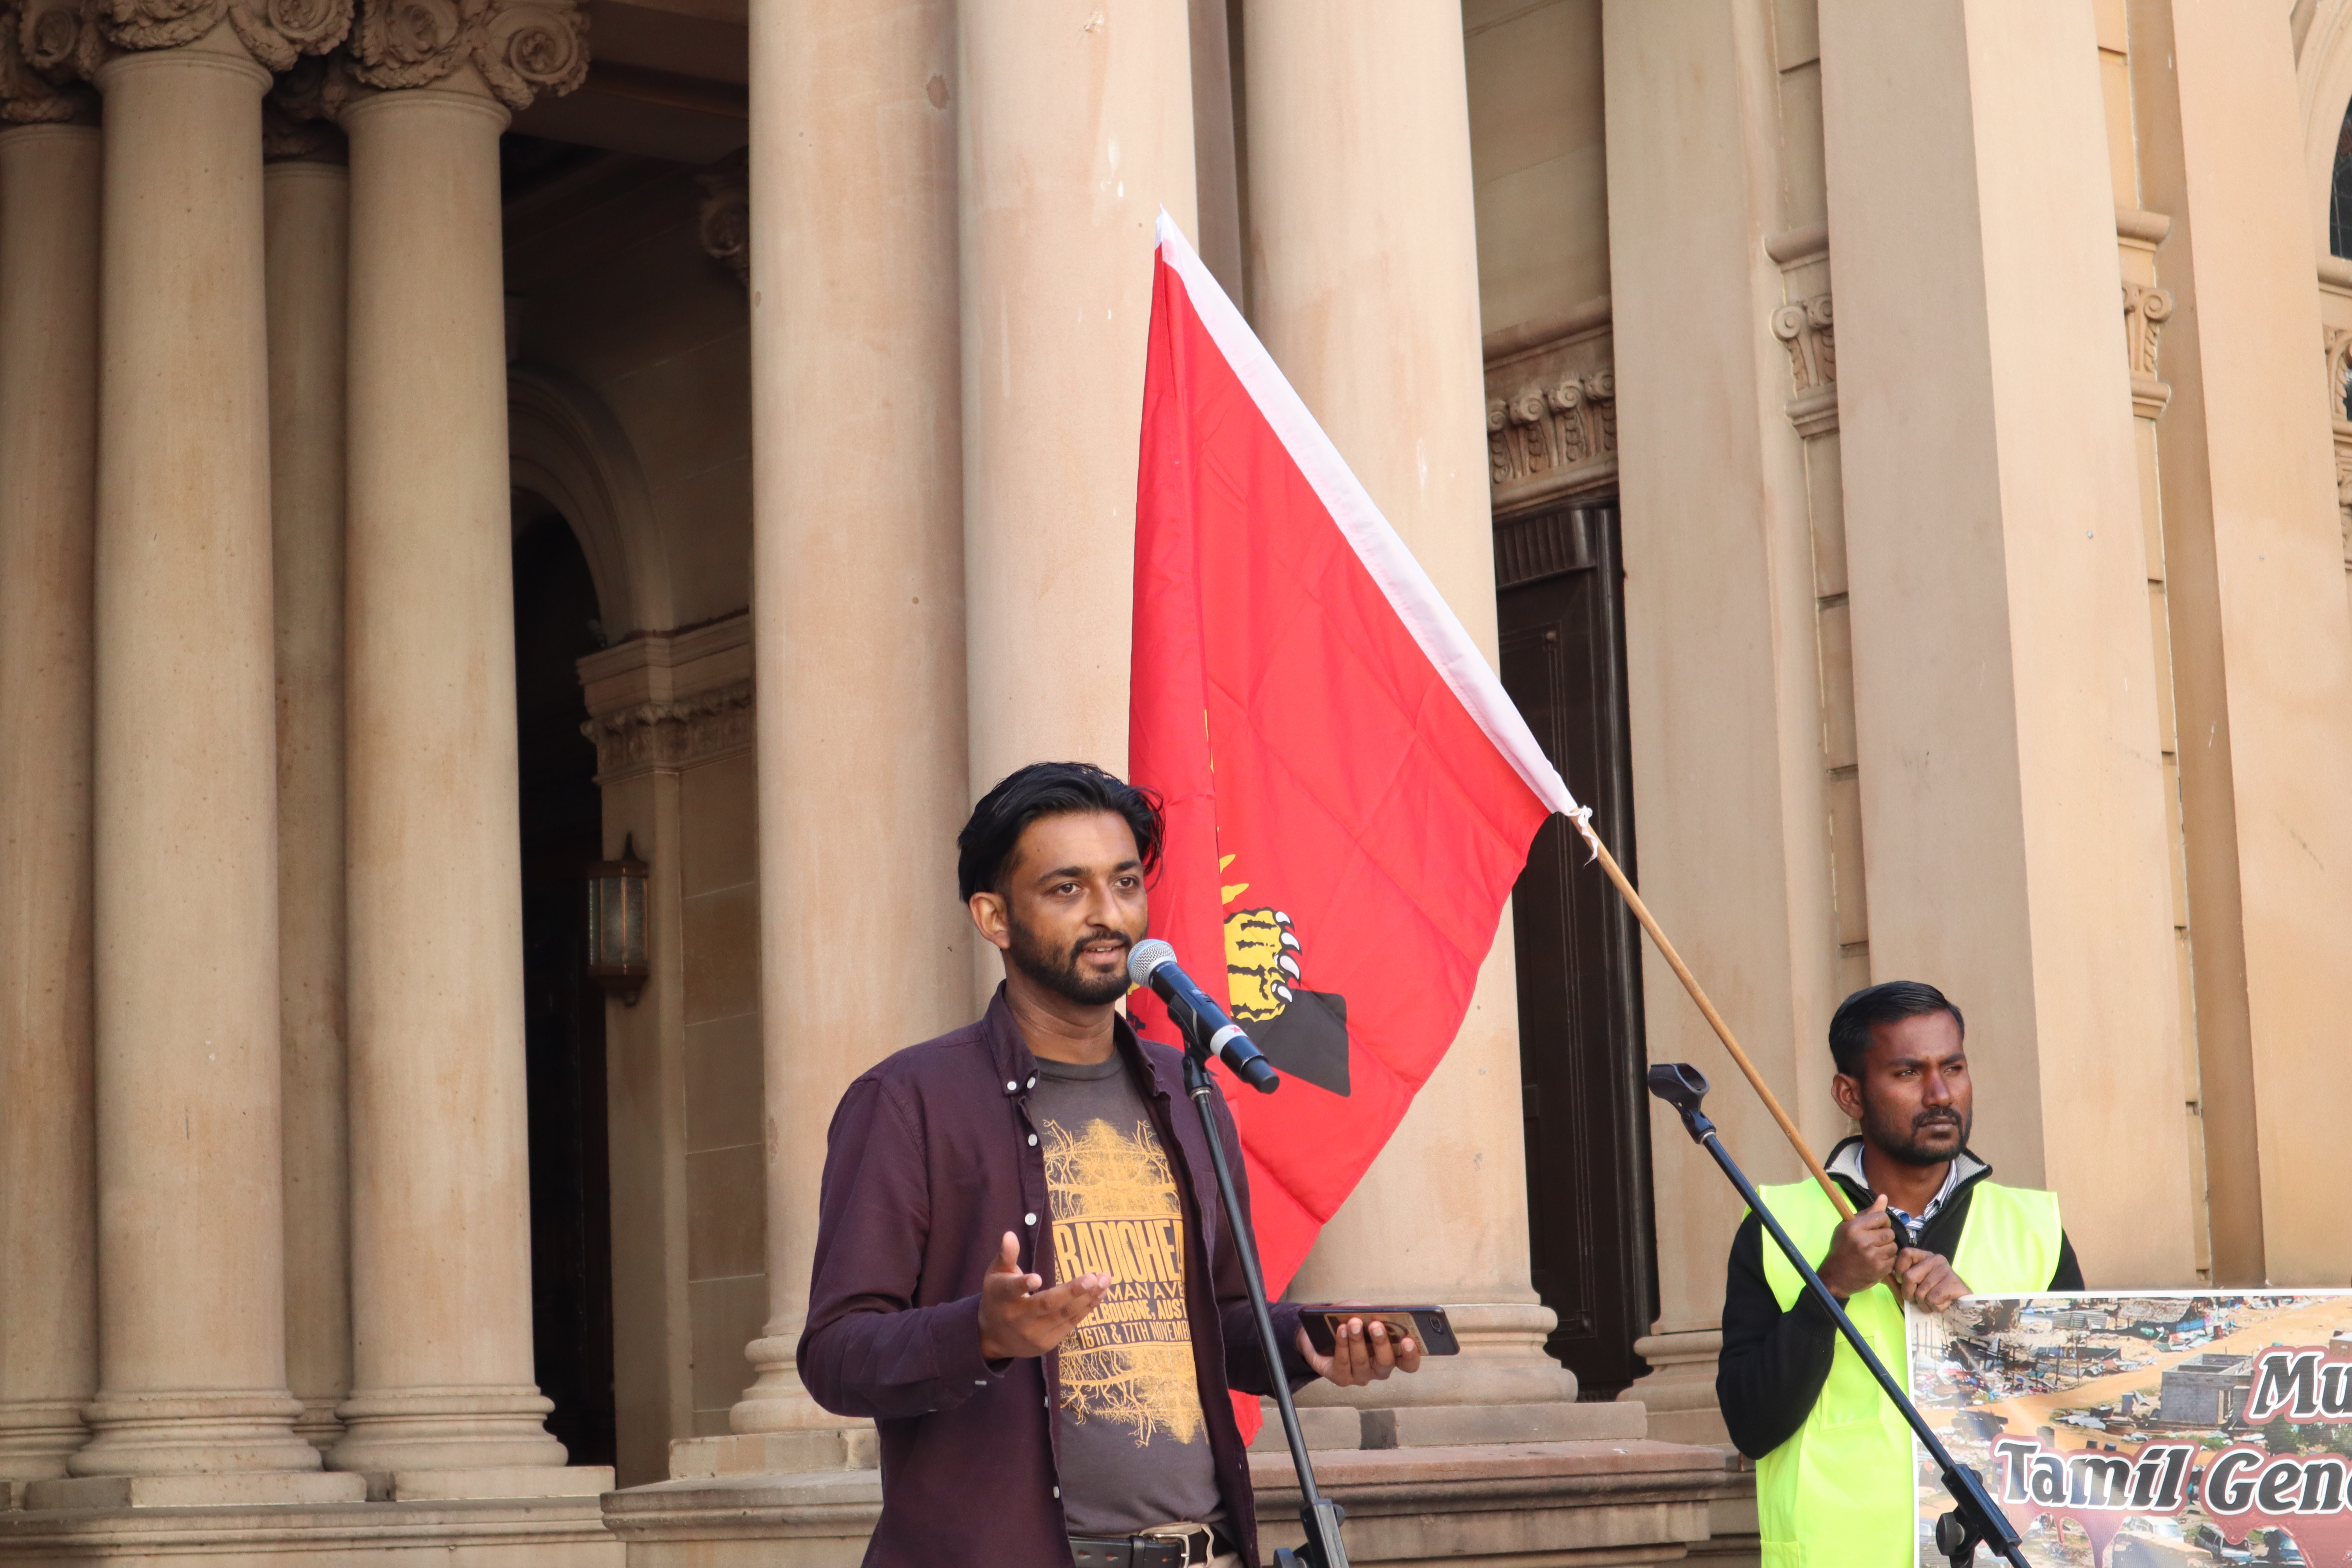 Tamil Refugee Council spokesperson Barathan Vidhyapathy speaks on the situation in Sri Lanka